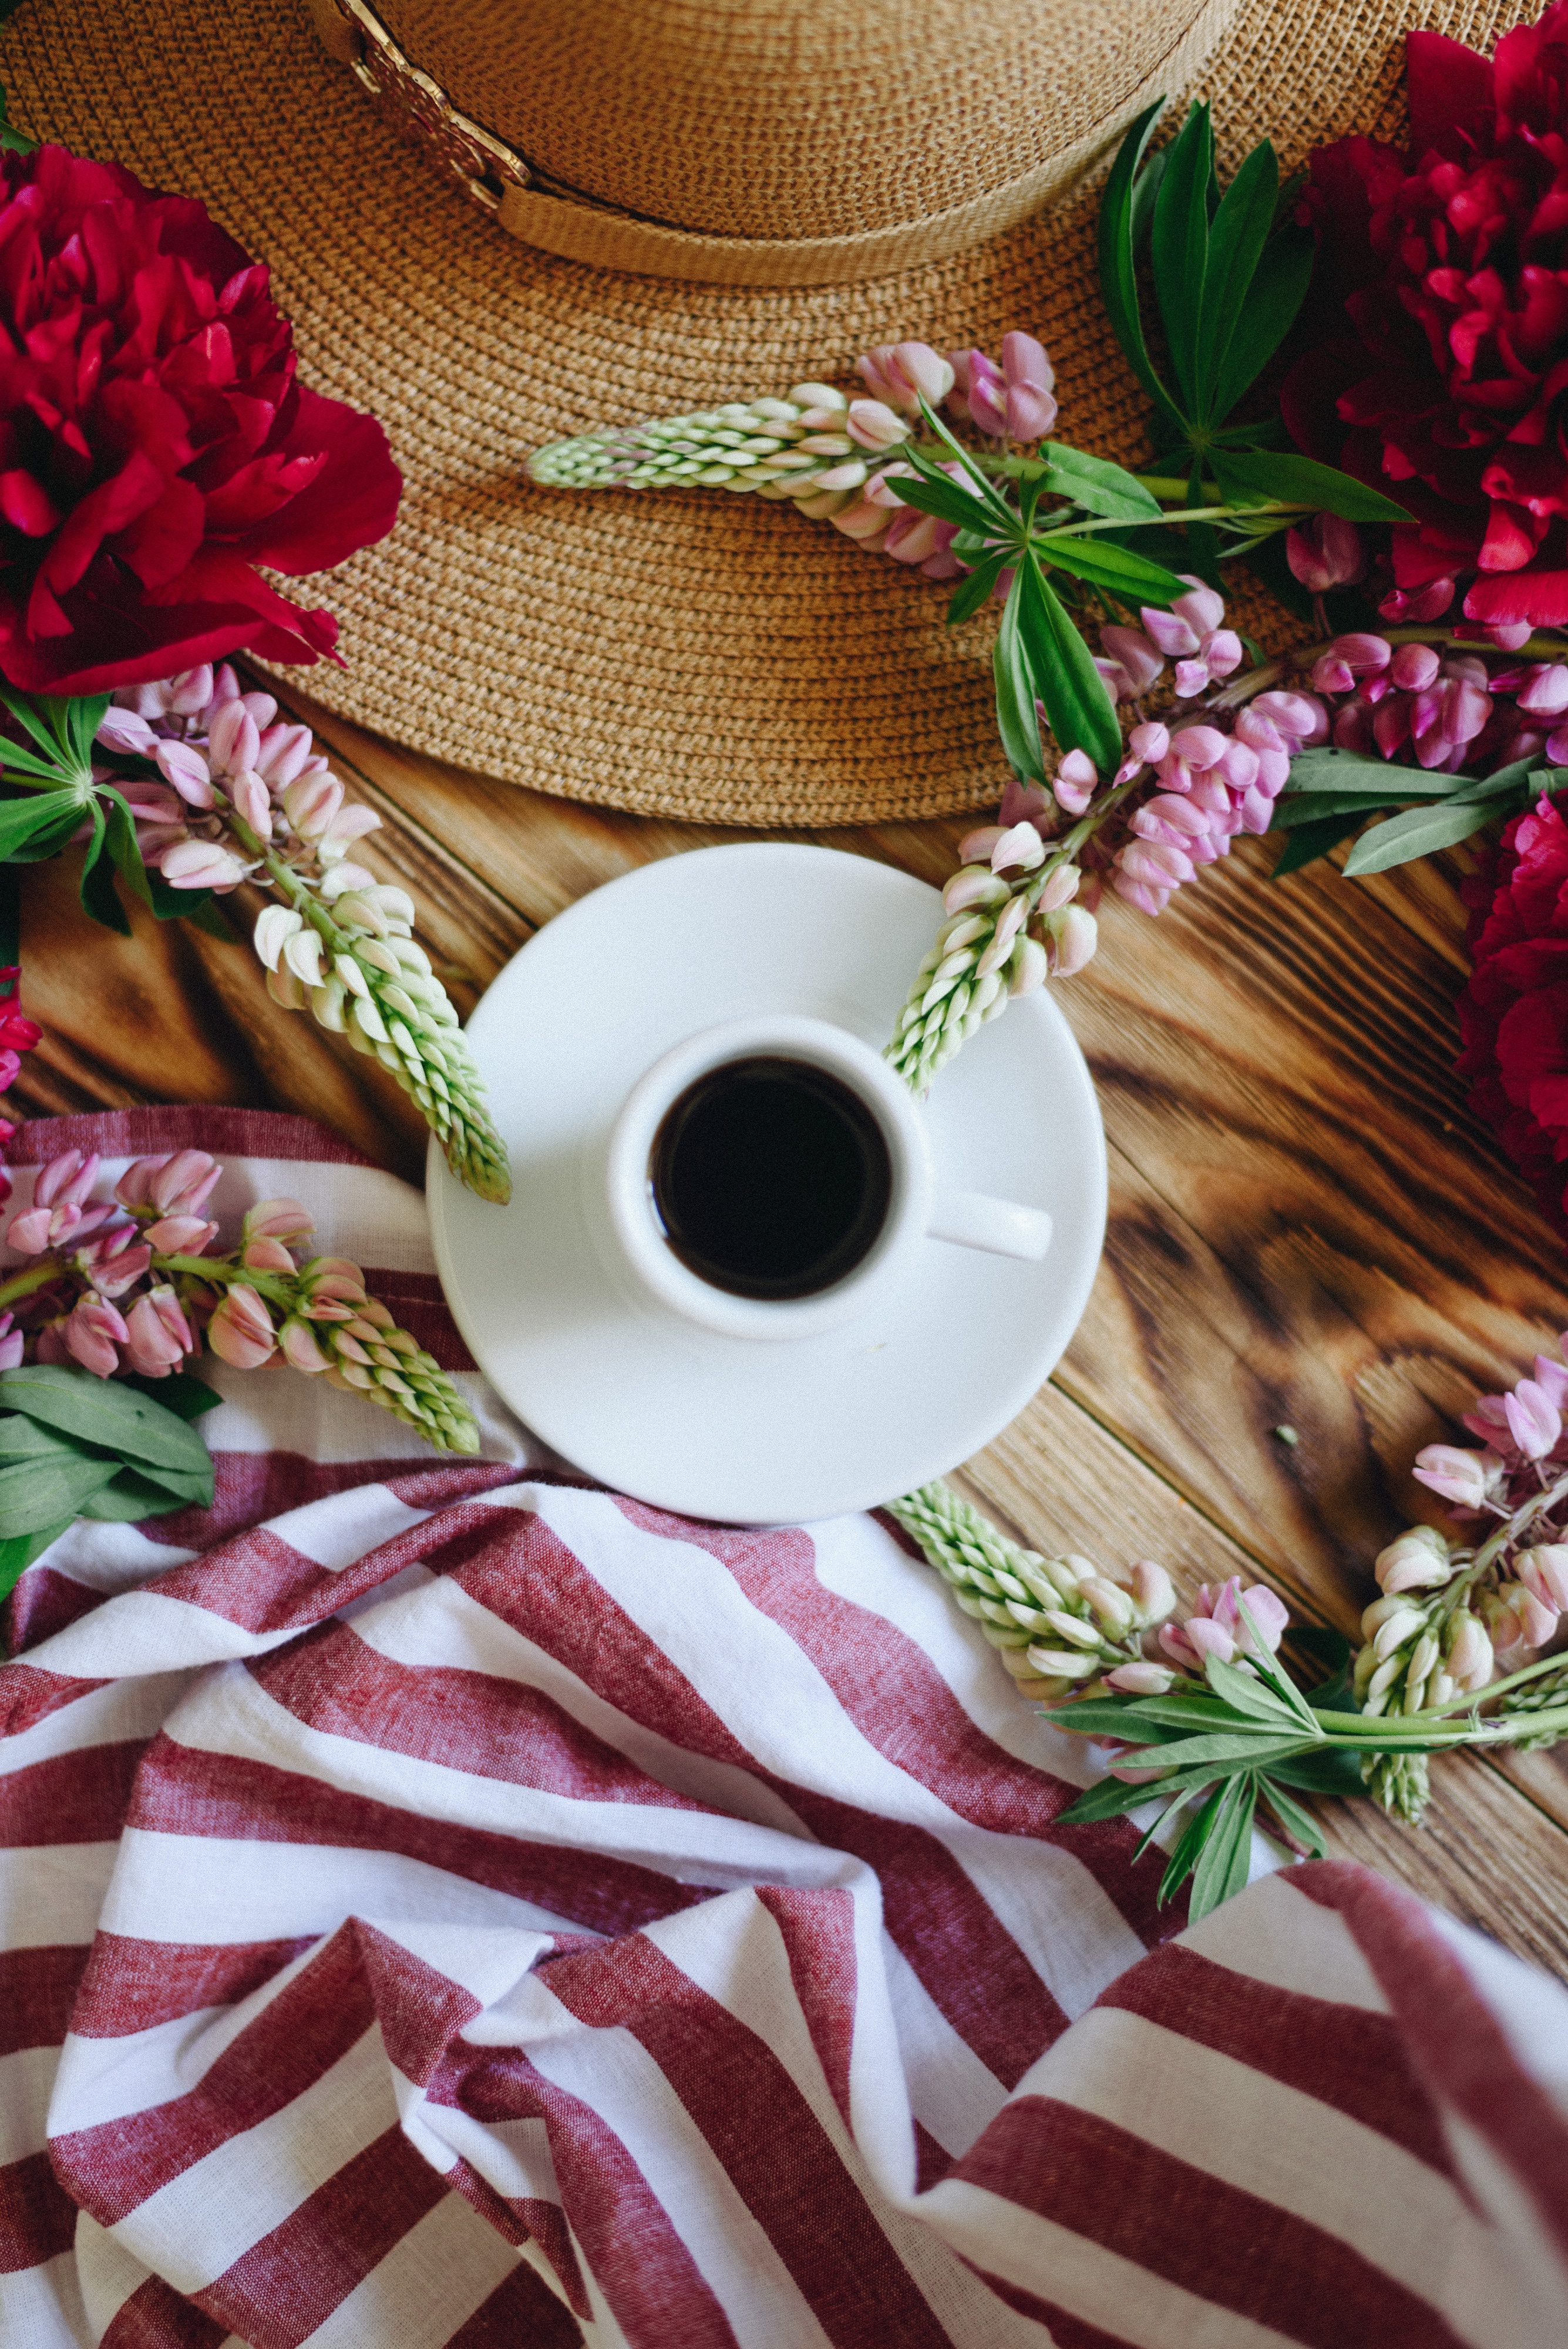 cup, hat, flowers, food, table Full HD